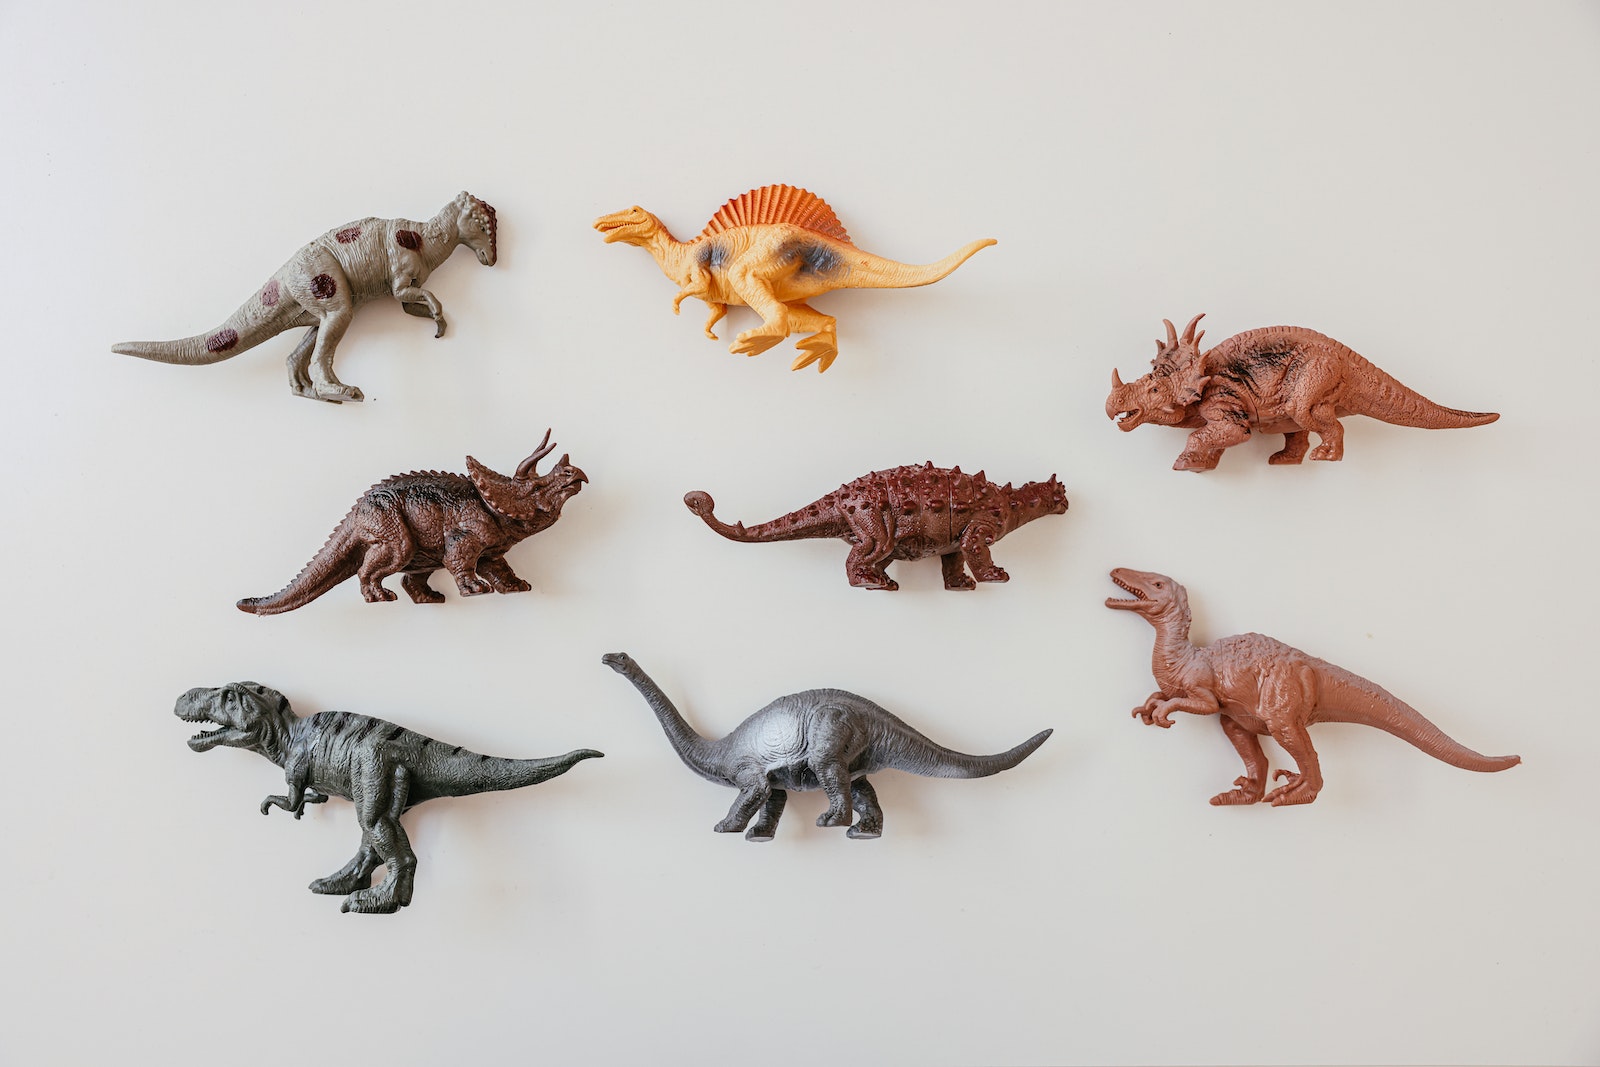 Different Species of Dinosaur Plastic Toy on a White Surface